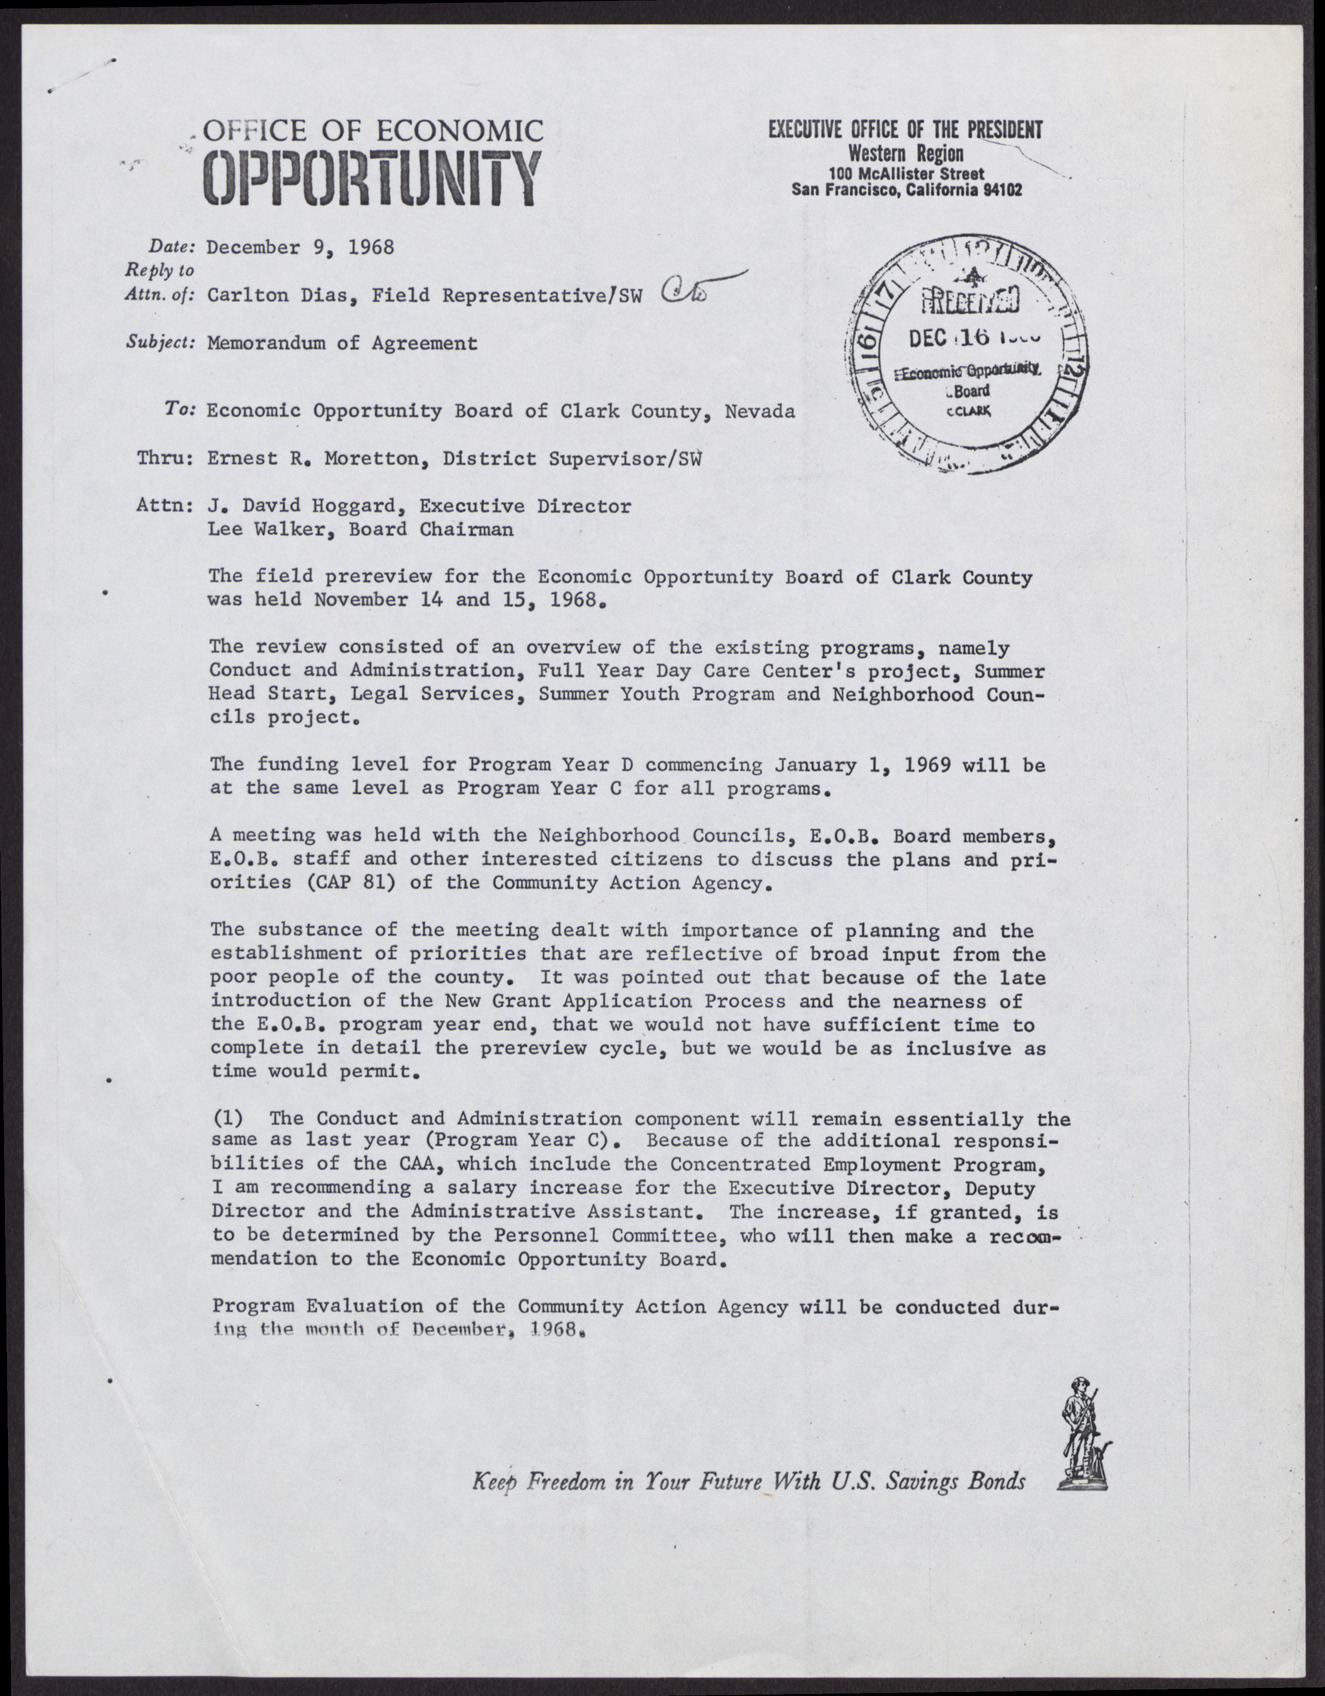 Letter to Economic Opportunity Board from Carlton Dias (3 pages), December 9, 1968